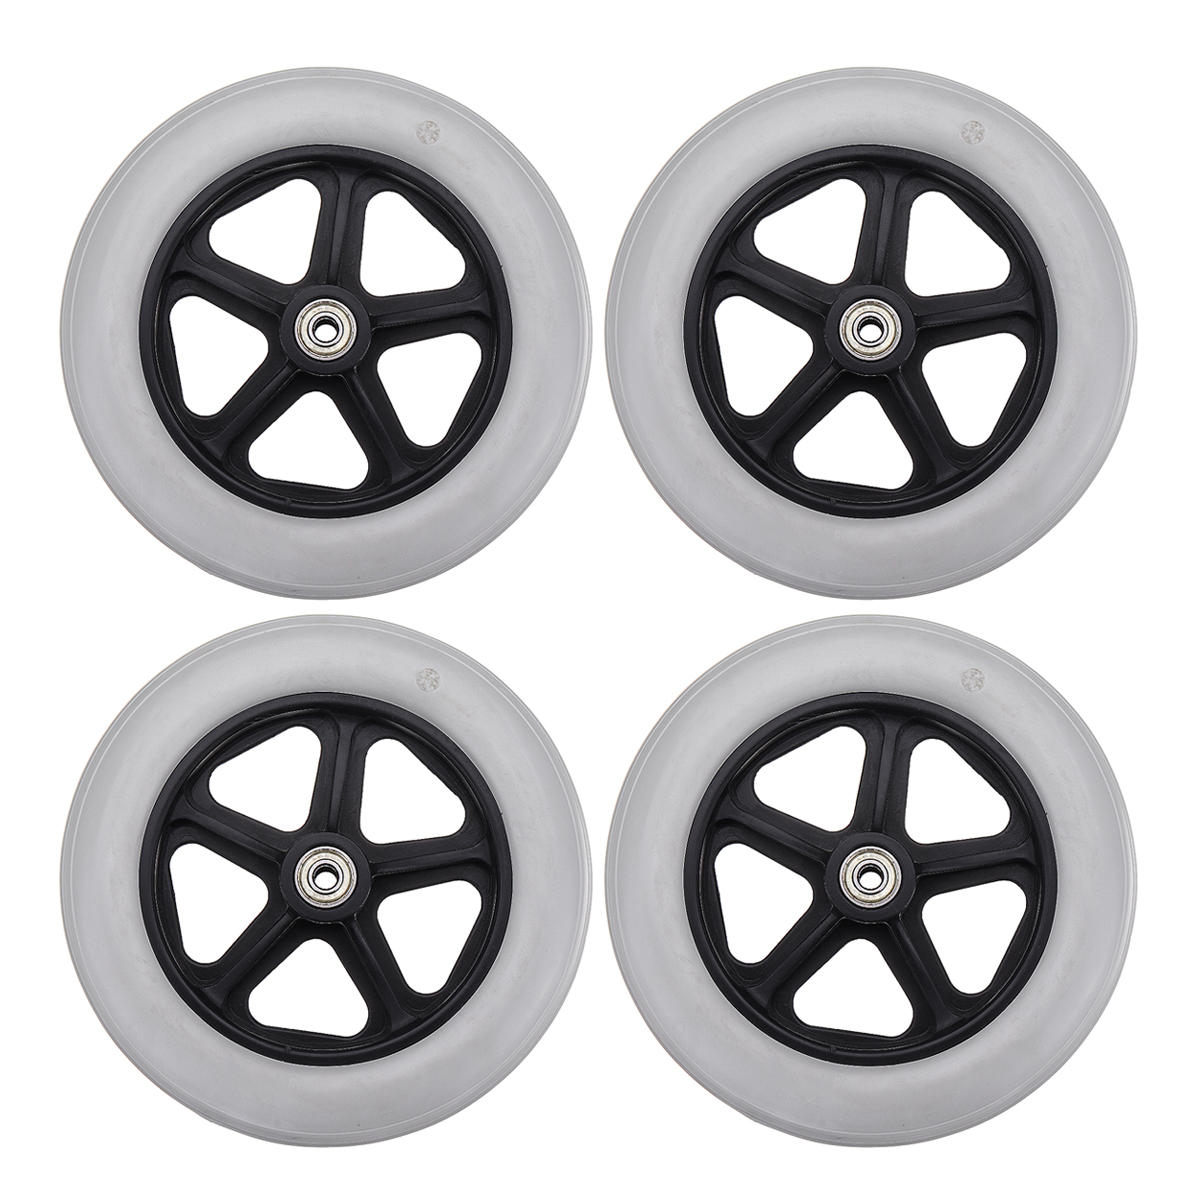 4pcs Caster Wheel With Bearing For Rollator Walker Replacement